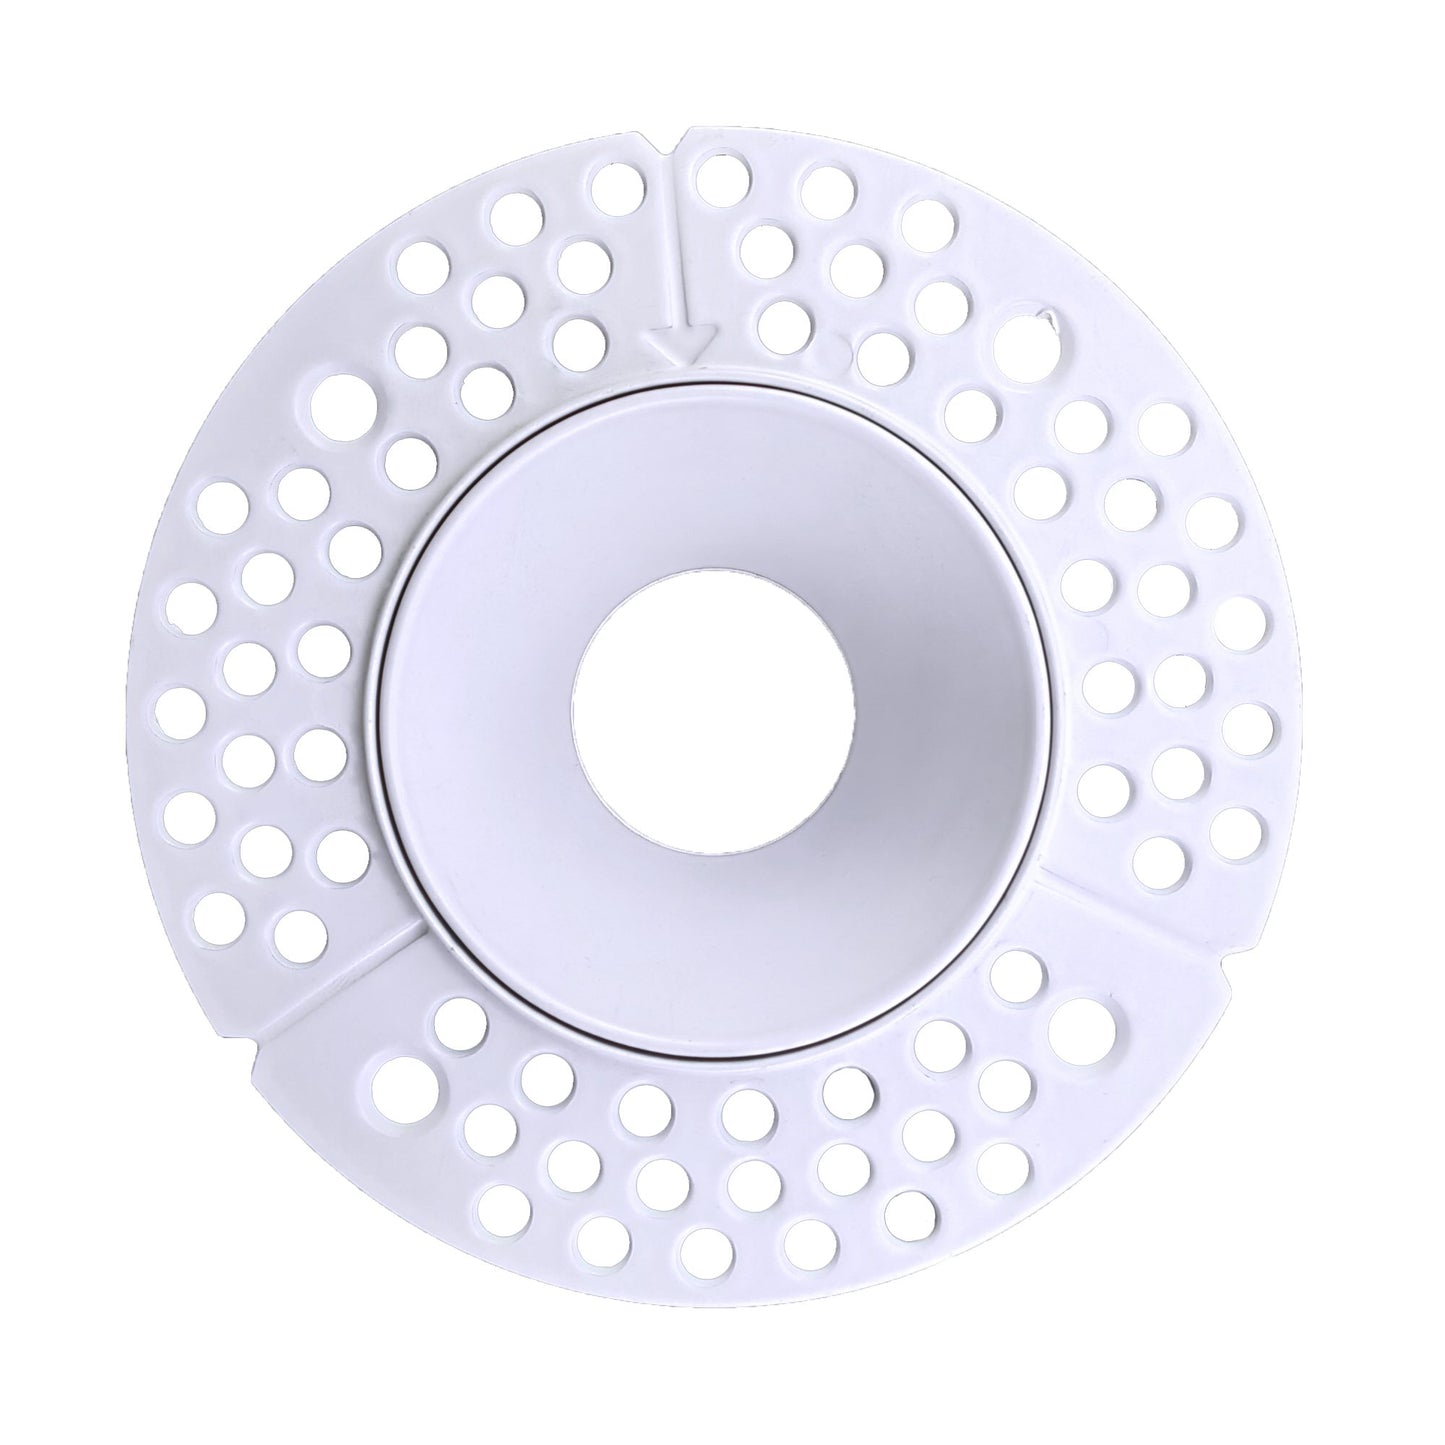 GDL-G10913Goodlite Changeable Trim for Aster 2" 8W/14W/20W Regress Luminaire Selectable CCT